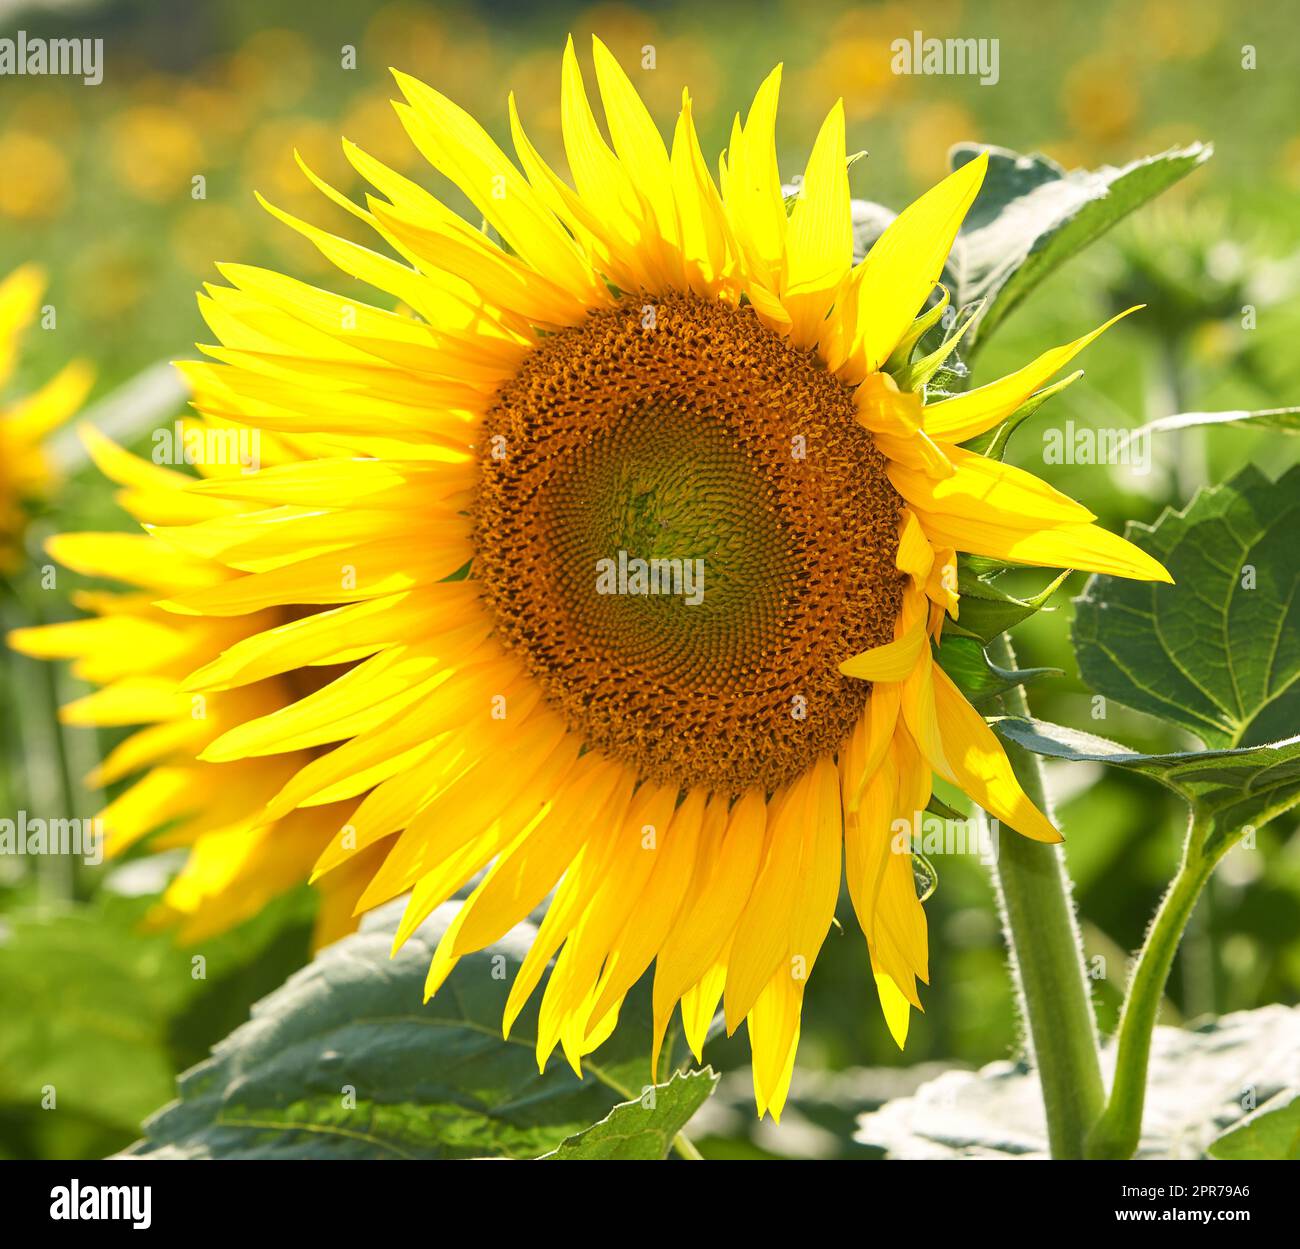 One sunflower growing in a field against a blurred nature background in summer. A single yellow flowering plant blooming on a green field in spring. Closeup of a flowerhead blossoming in a garden Stock Photo